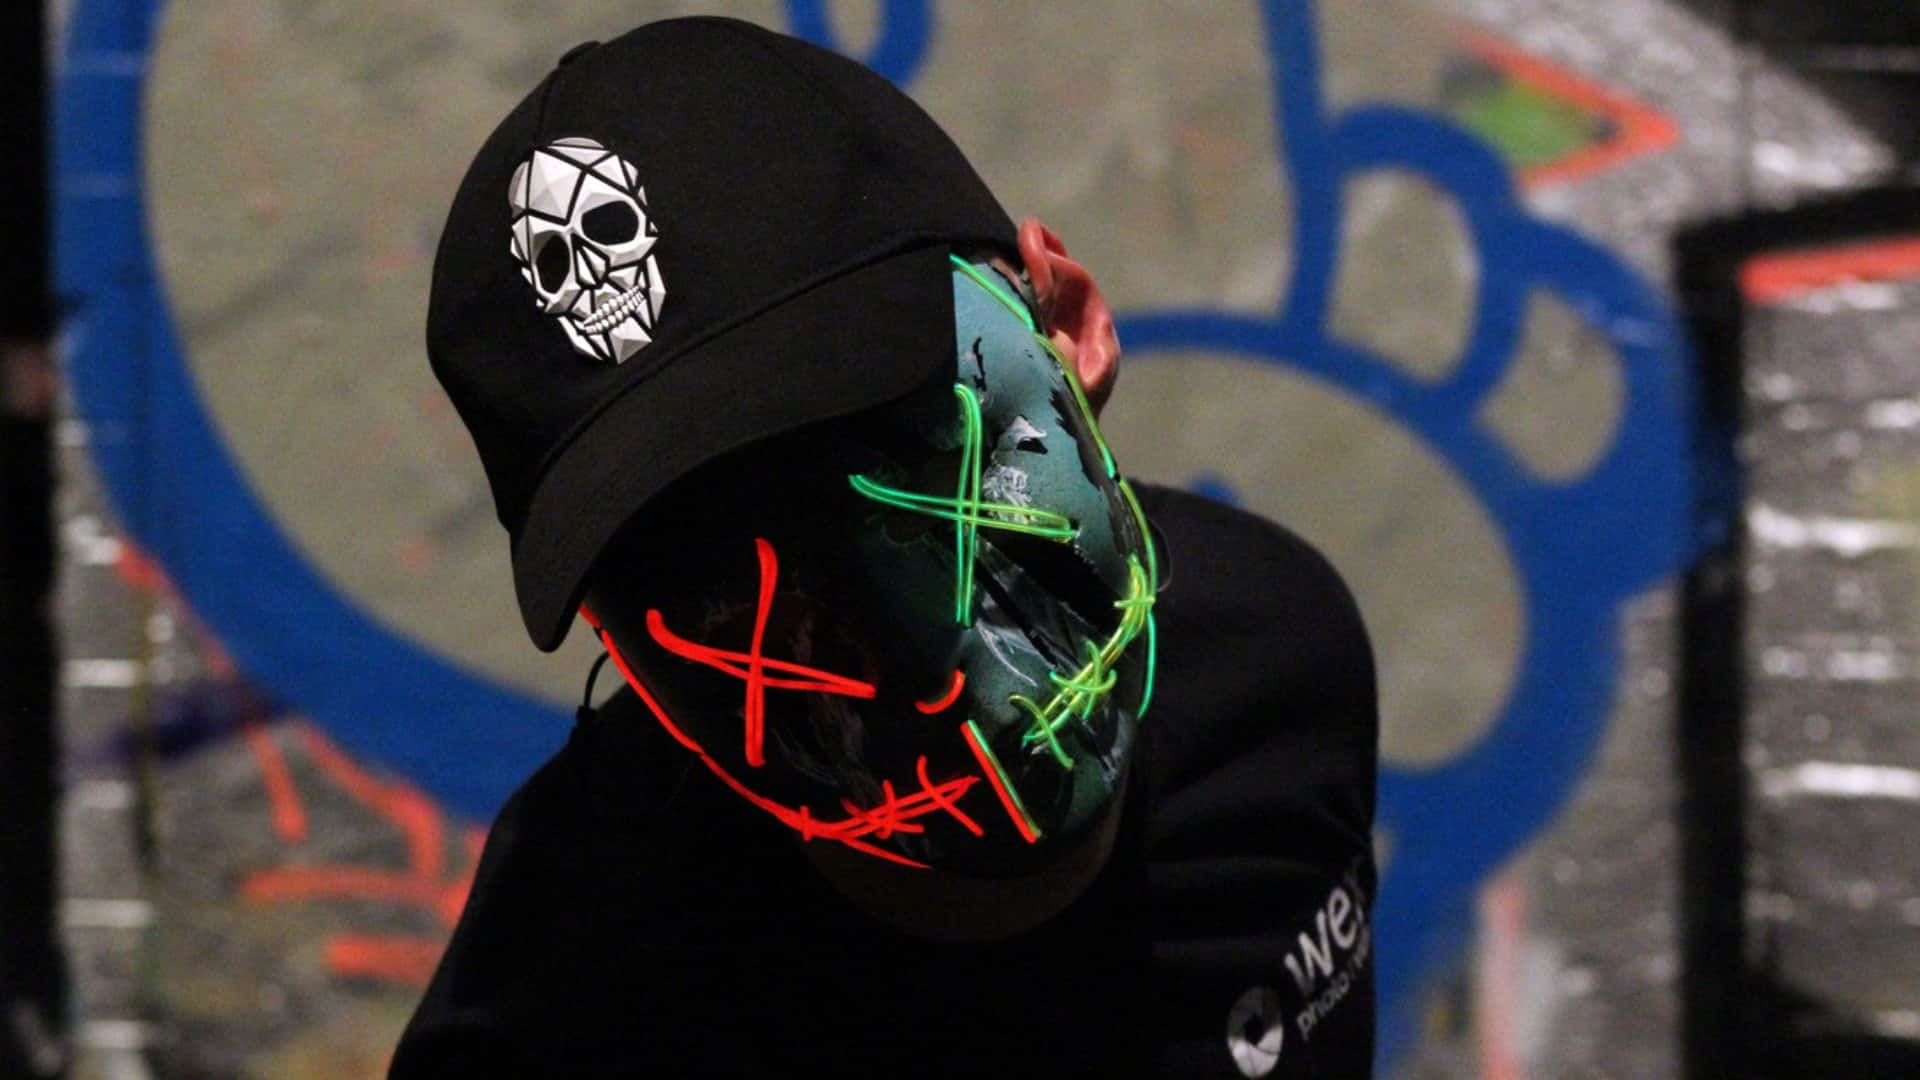 Masked Man With A Black Cap With Skull Logo